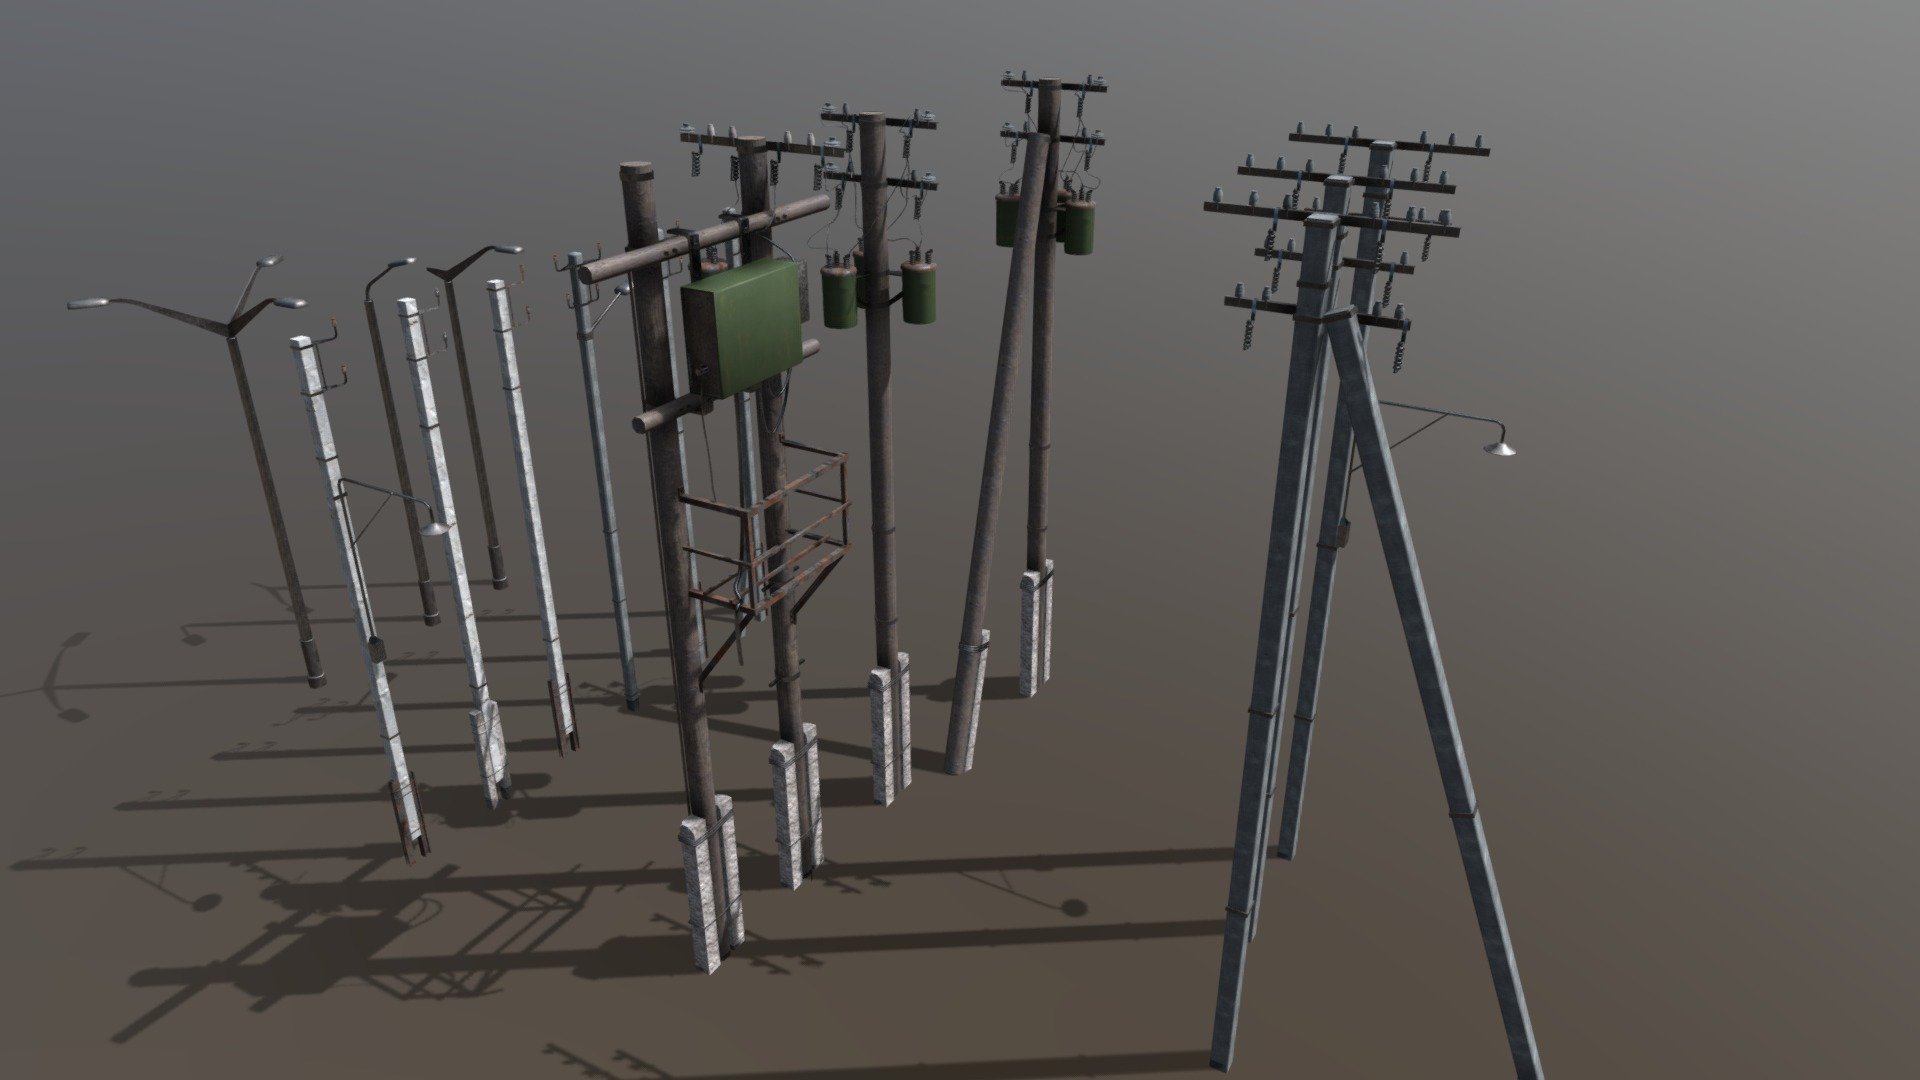 Game asset.
Really simple pack of 15 electric poles(3 variants + light poles).
They have some details on them, but really minimal for game. 
Textures are seamless 2k PBR easy to replaced if needed.
Made in Blender for personal project 3d model